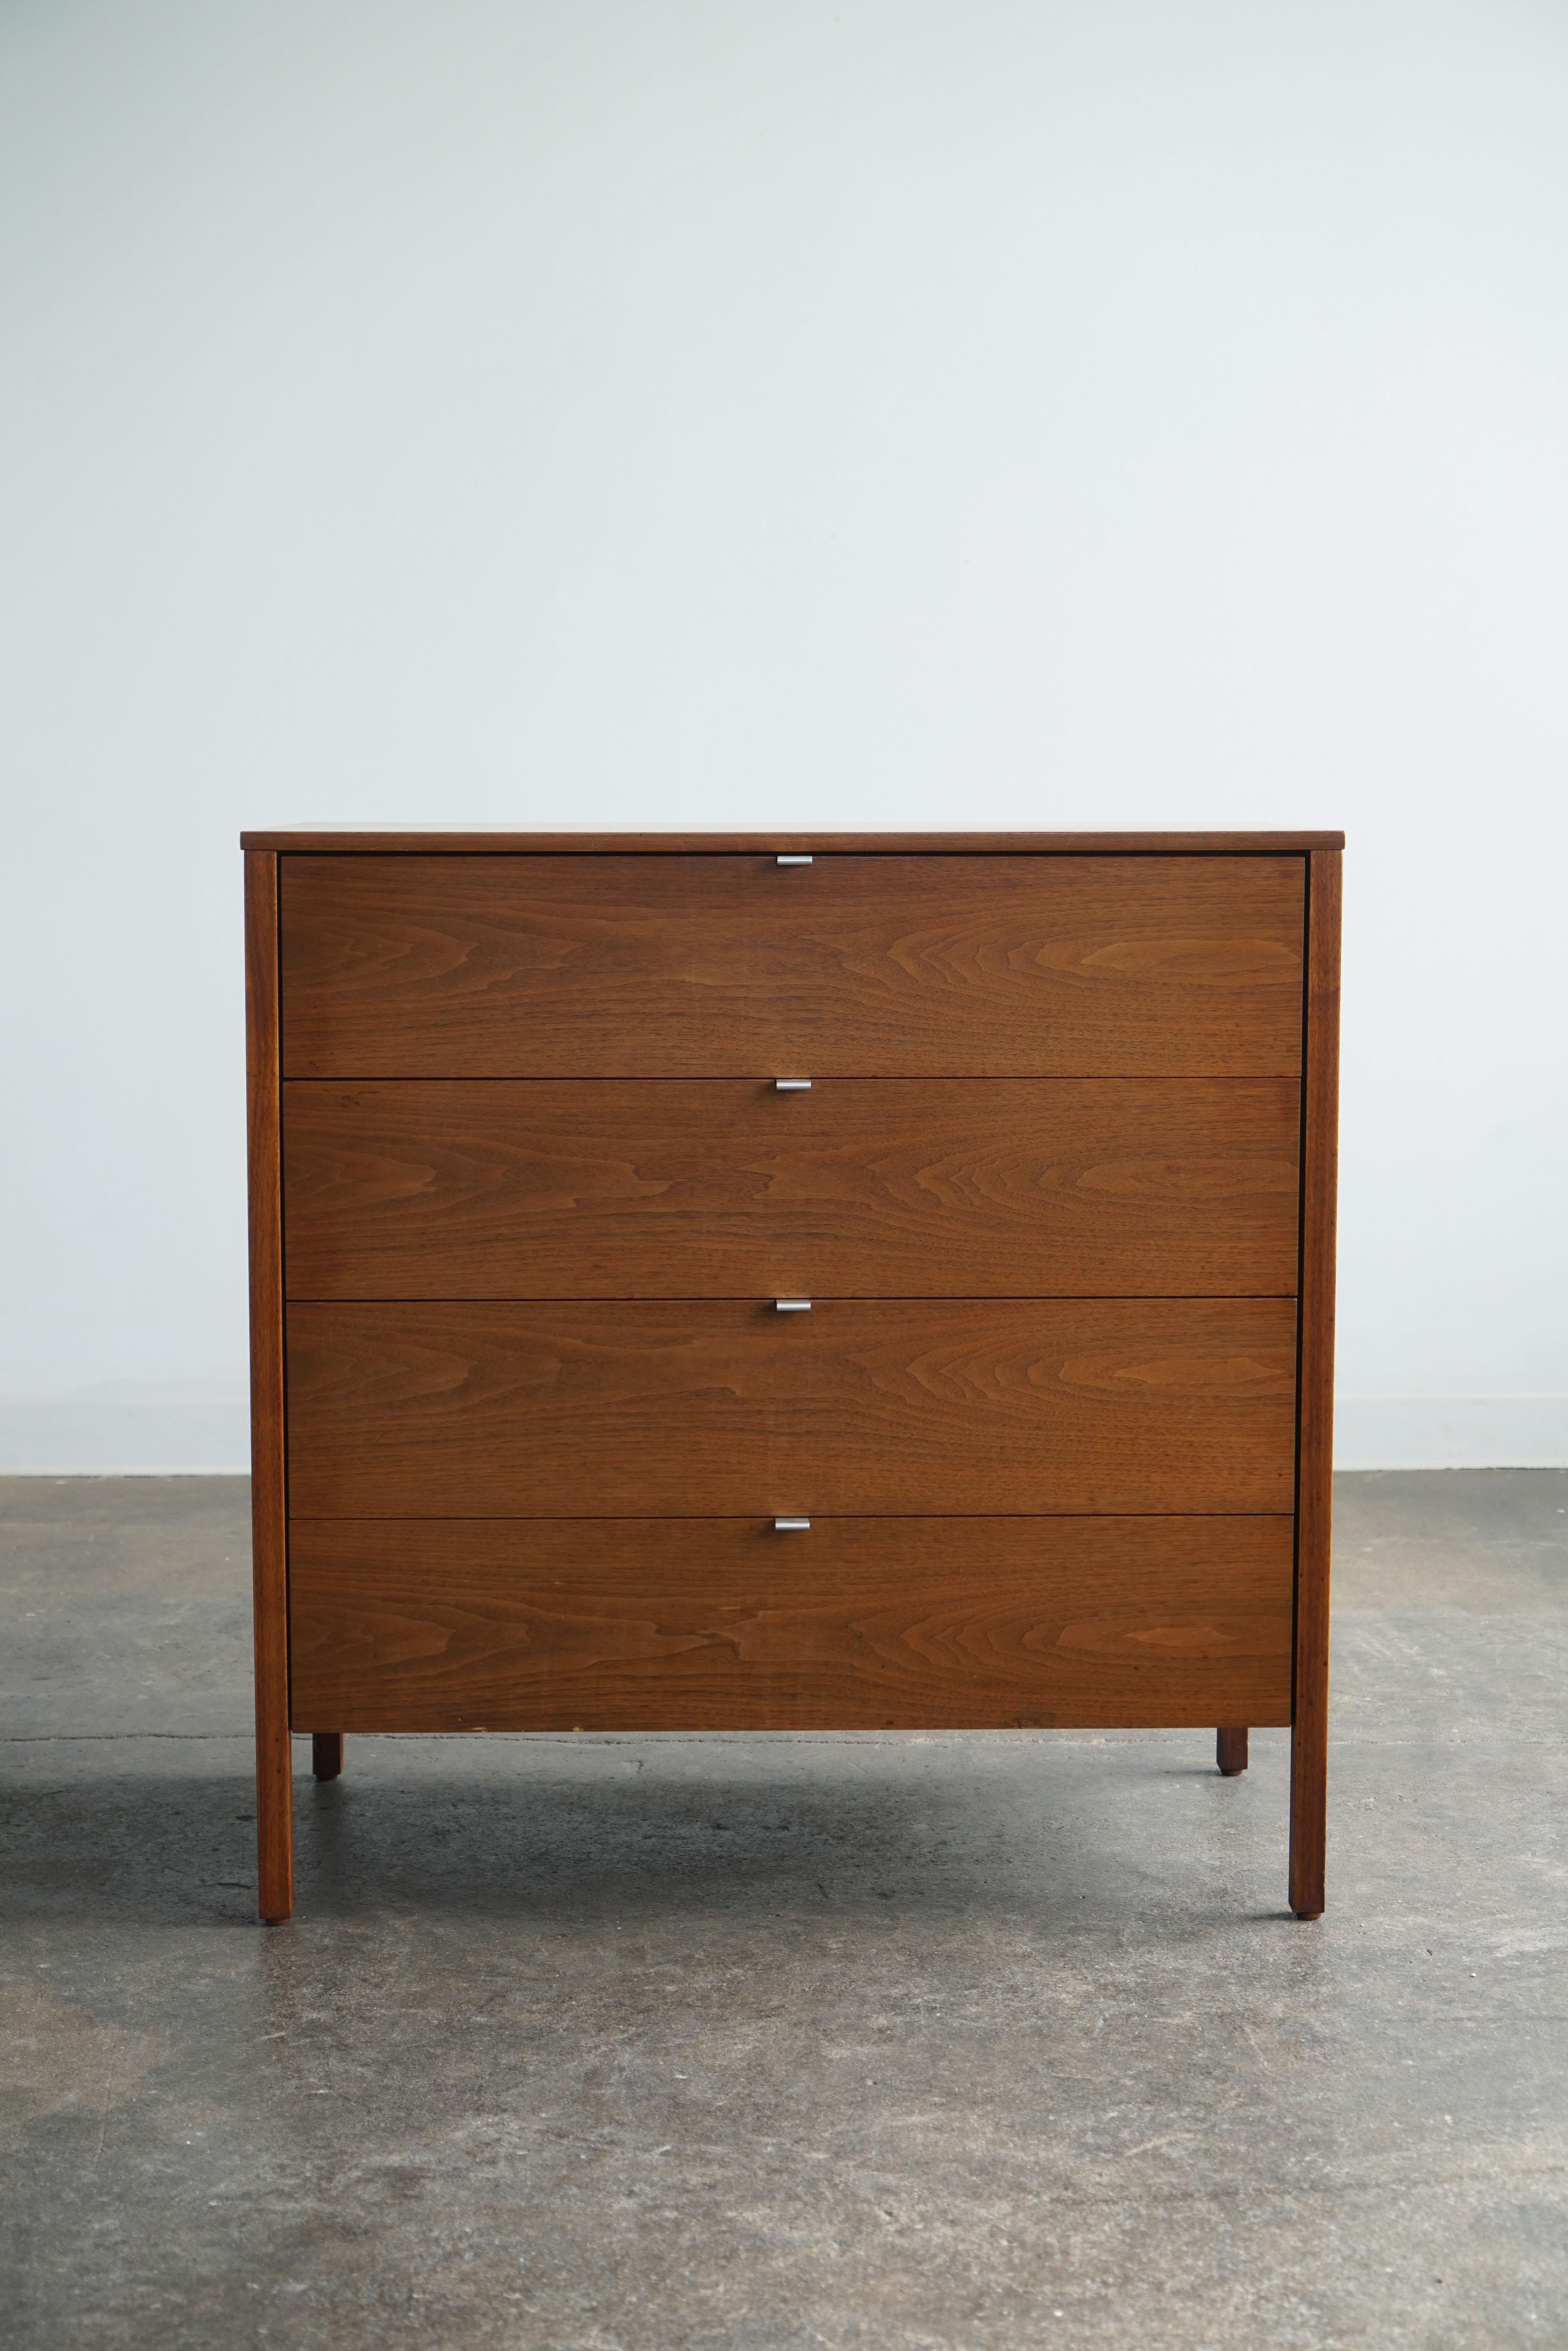 Florence Knoll Walnut 34-drawer dresser for Knoll International. 
Circa 1960's
Walnut with chrome plated steel drawers pulls

The pieces have clean, simple lines and have a robust construction, much like all the pieces she designed. 

Condition: